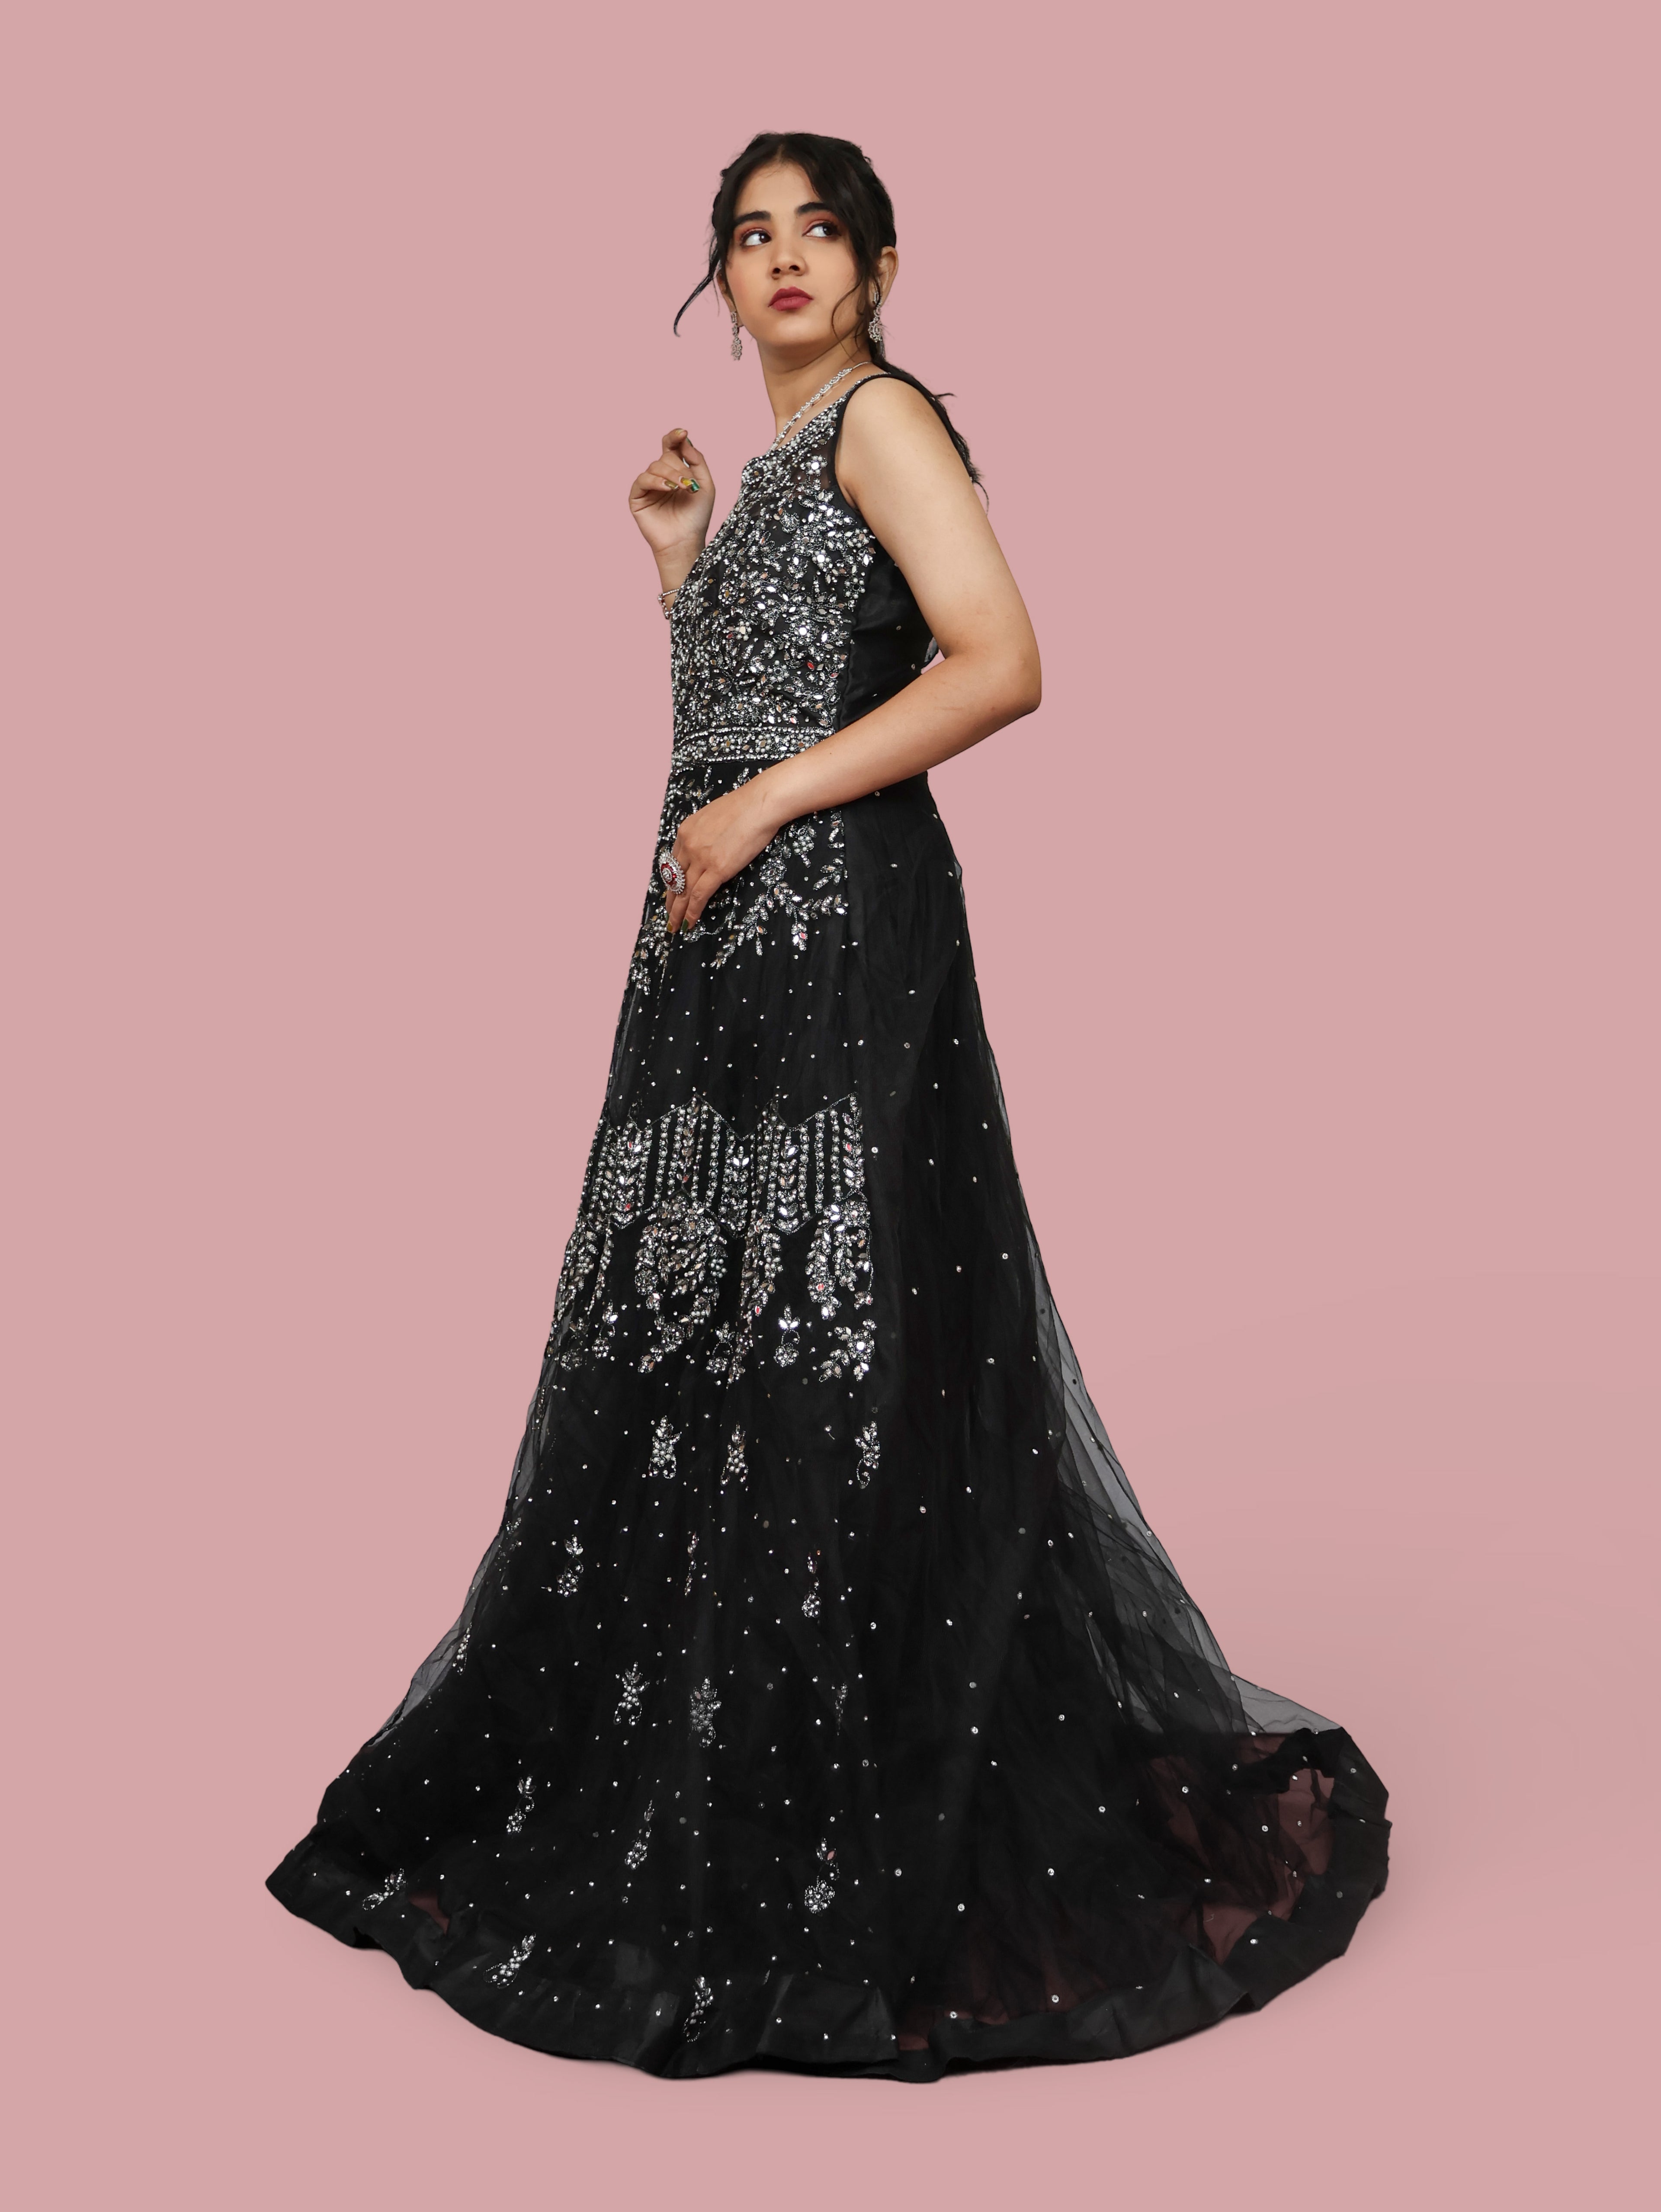 Net Fabric Gown with Mirror &amp; Pearls by Shreekama Black Designer Gowns for Party Festival Wedding Occasion in Noida